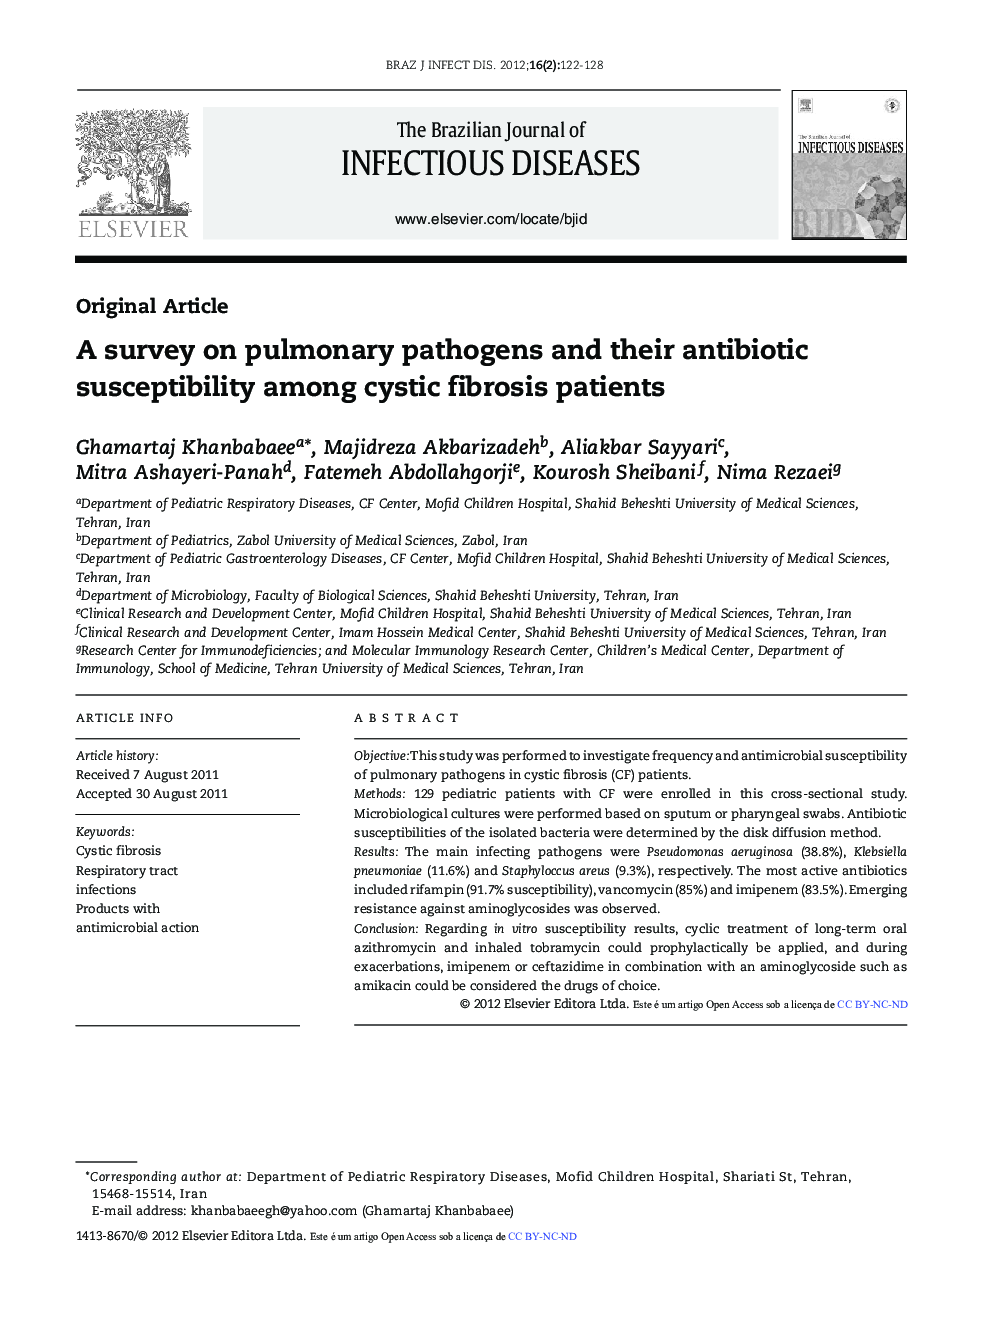 A survey on pulmonary pathogens and their antibiotic susceptibility among cystic fibrosis patients